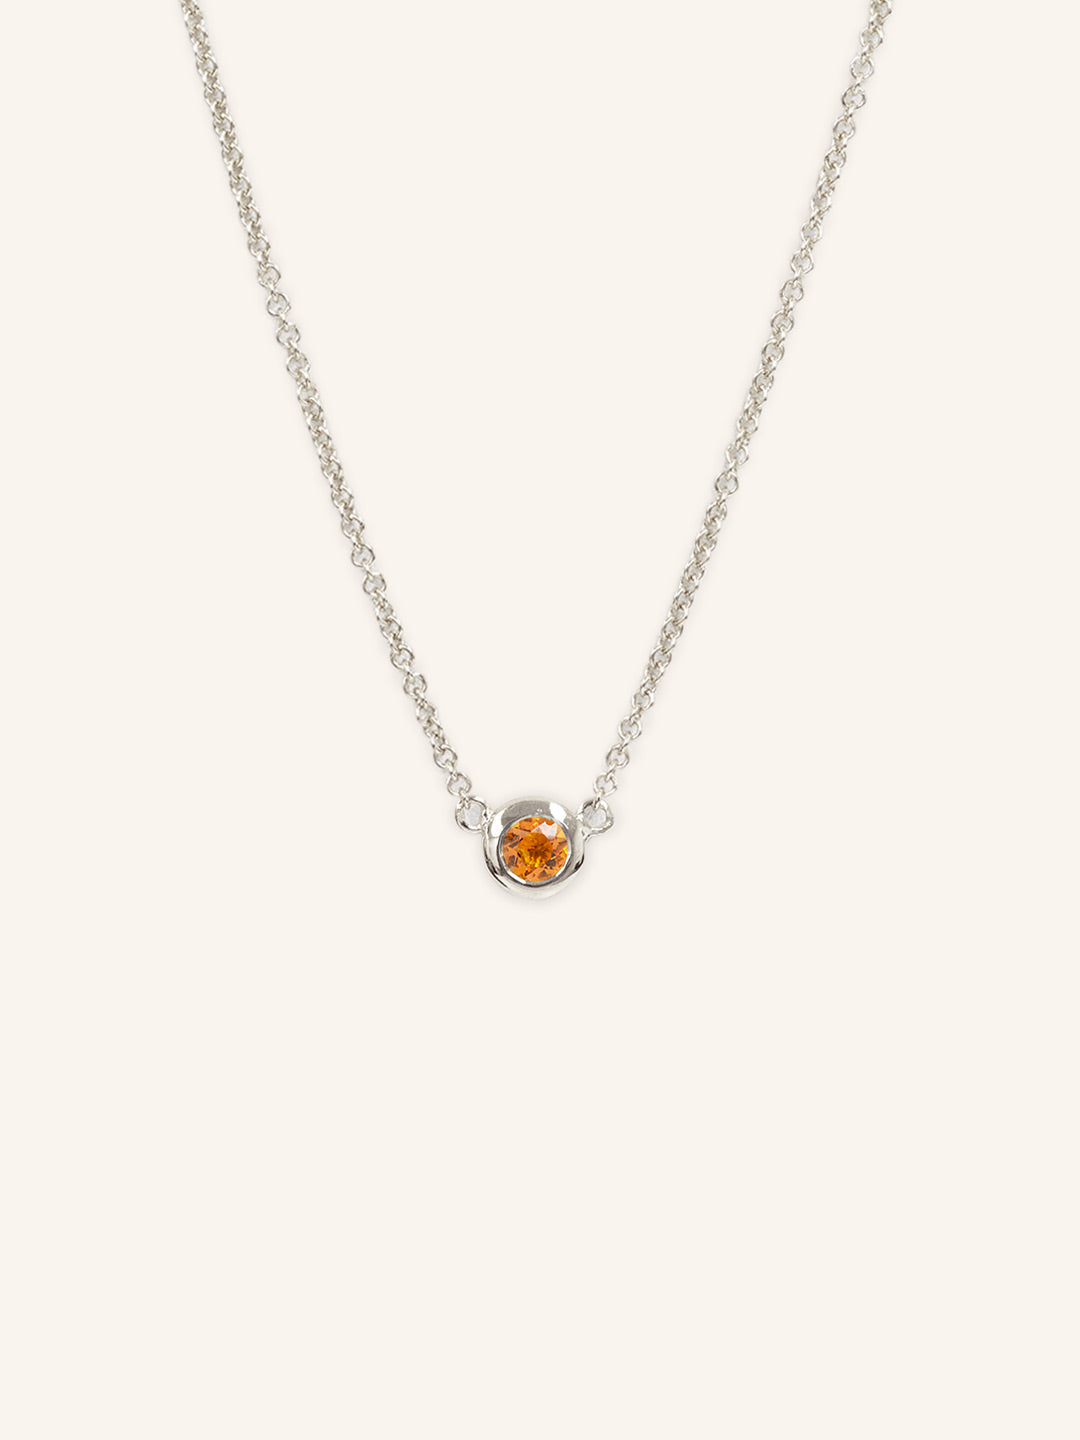 Fall into Autumn Citrine Necklace